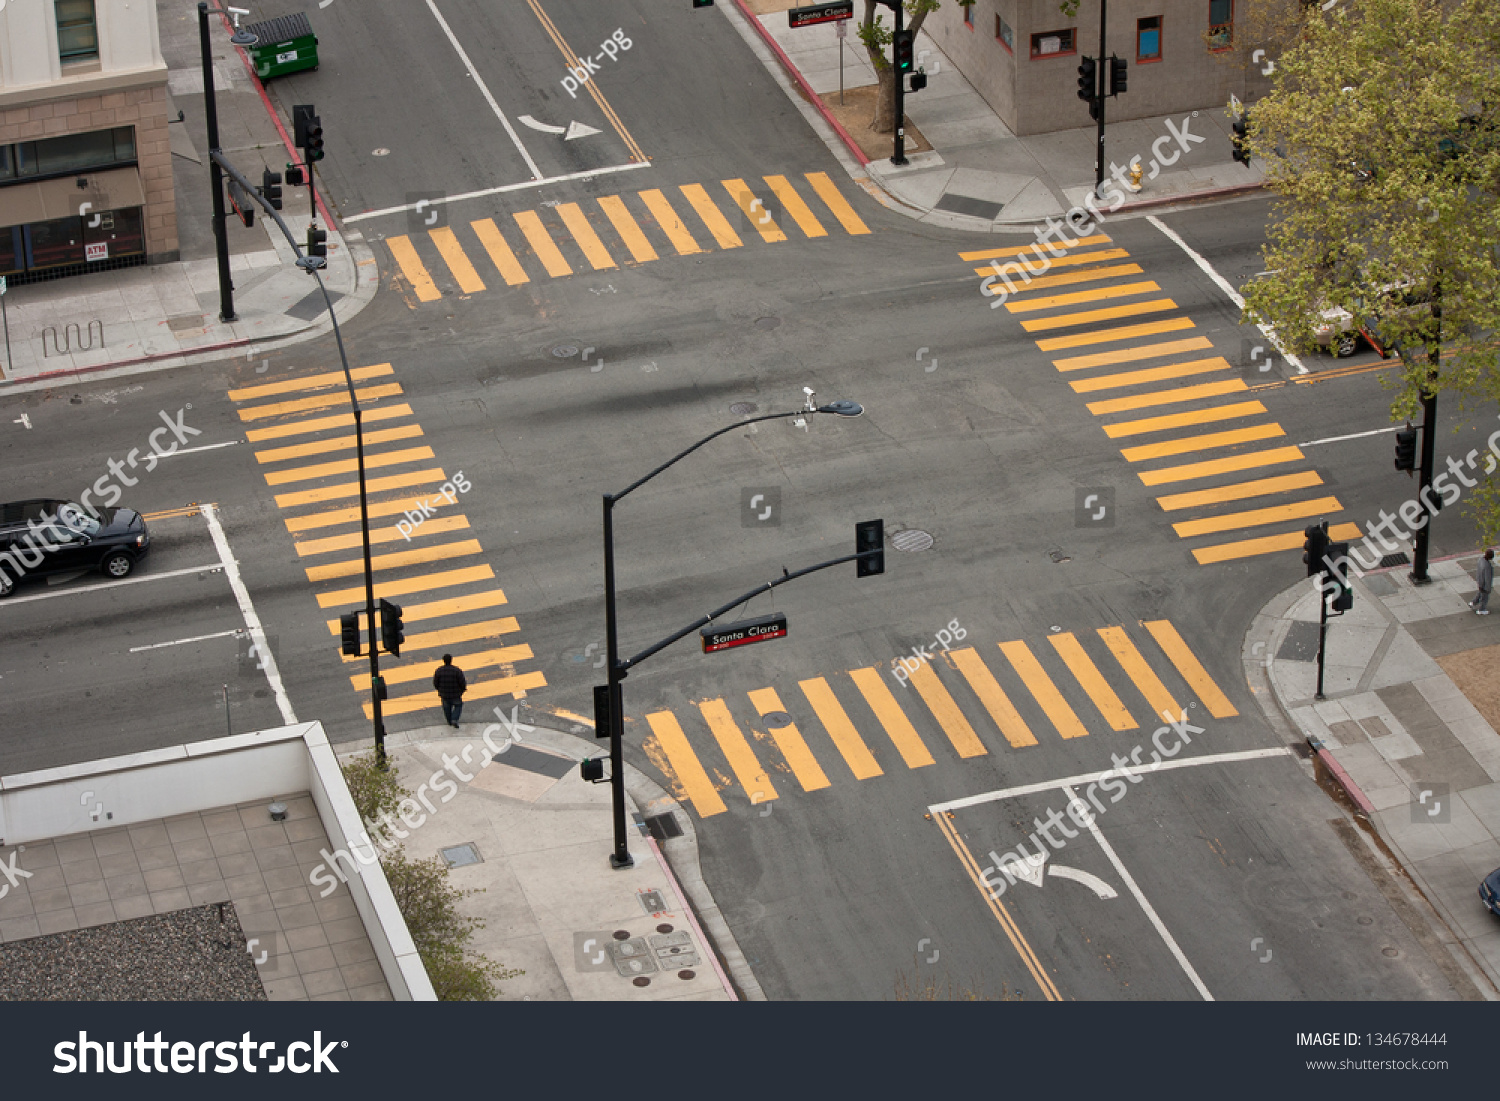 A high angle view of an almost empty street intersection, with yellow cross walk markings, traffic signal lights, and curb cuts, in San Jose, California. #134678444